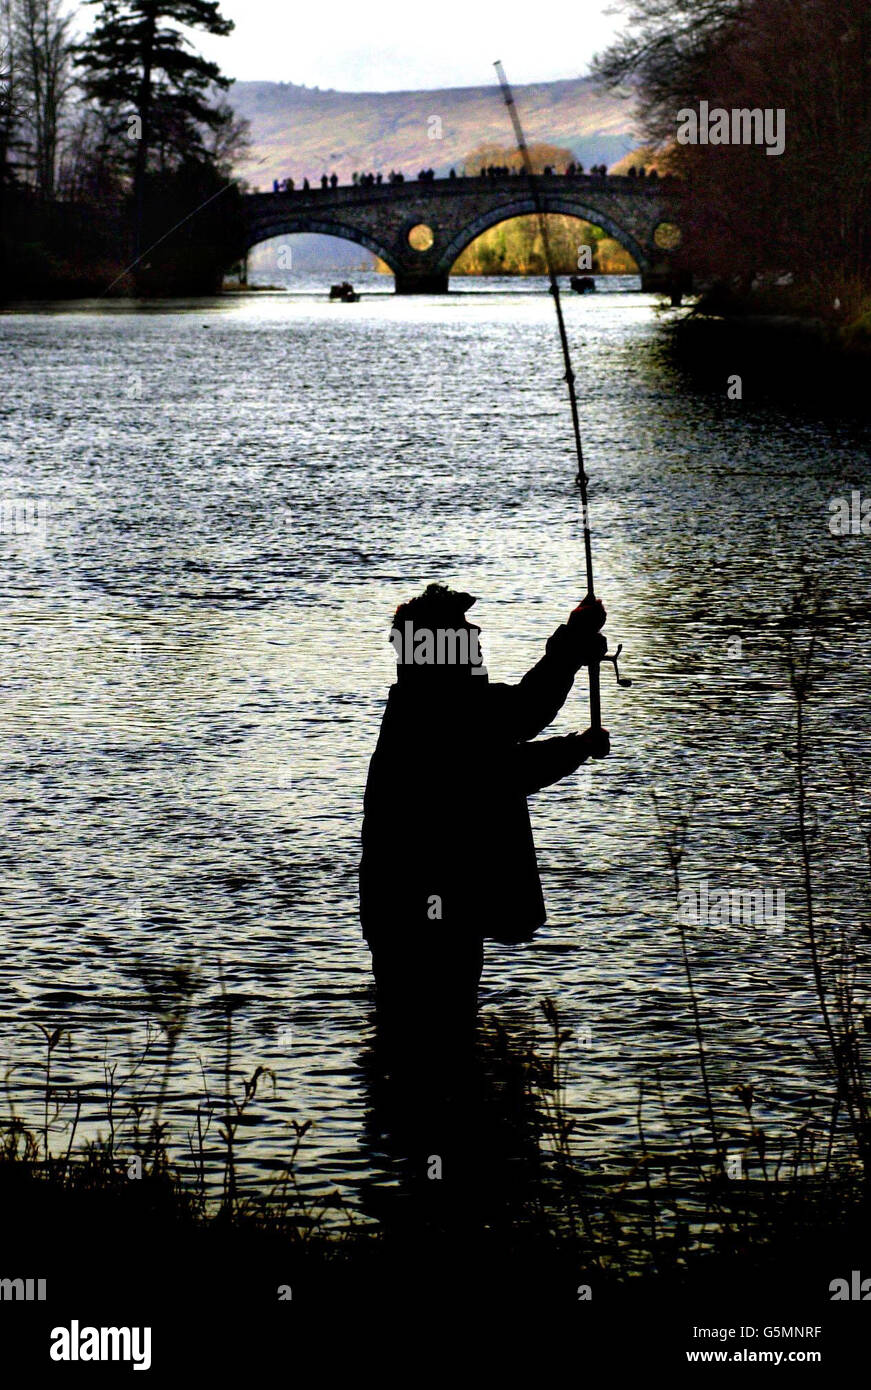 Hundreds of anglers were gathering on the banks of Scotland's biggest river for the launch of the salmon fishing season. The traditional January 15 start of the nine-month season on the Tay, in Perth and Kinross, is one of the biggest dates in the fishing calendar. * Although some rivers have already opened their season, the Tay is the first of the really big rivers to do so. Stock Photo